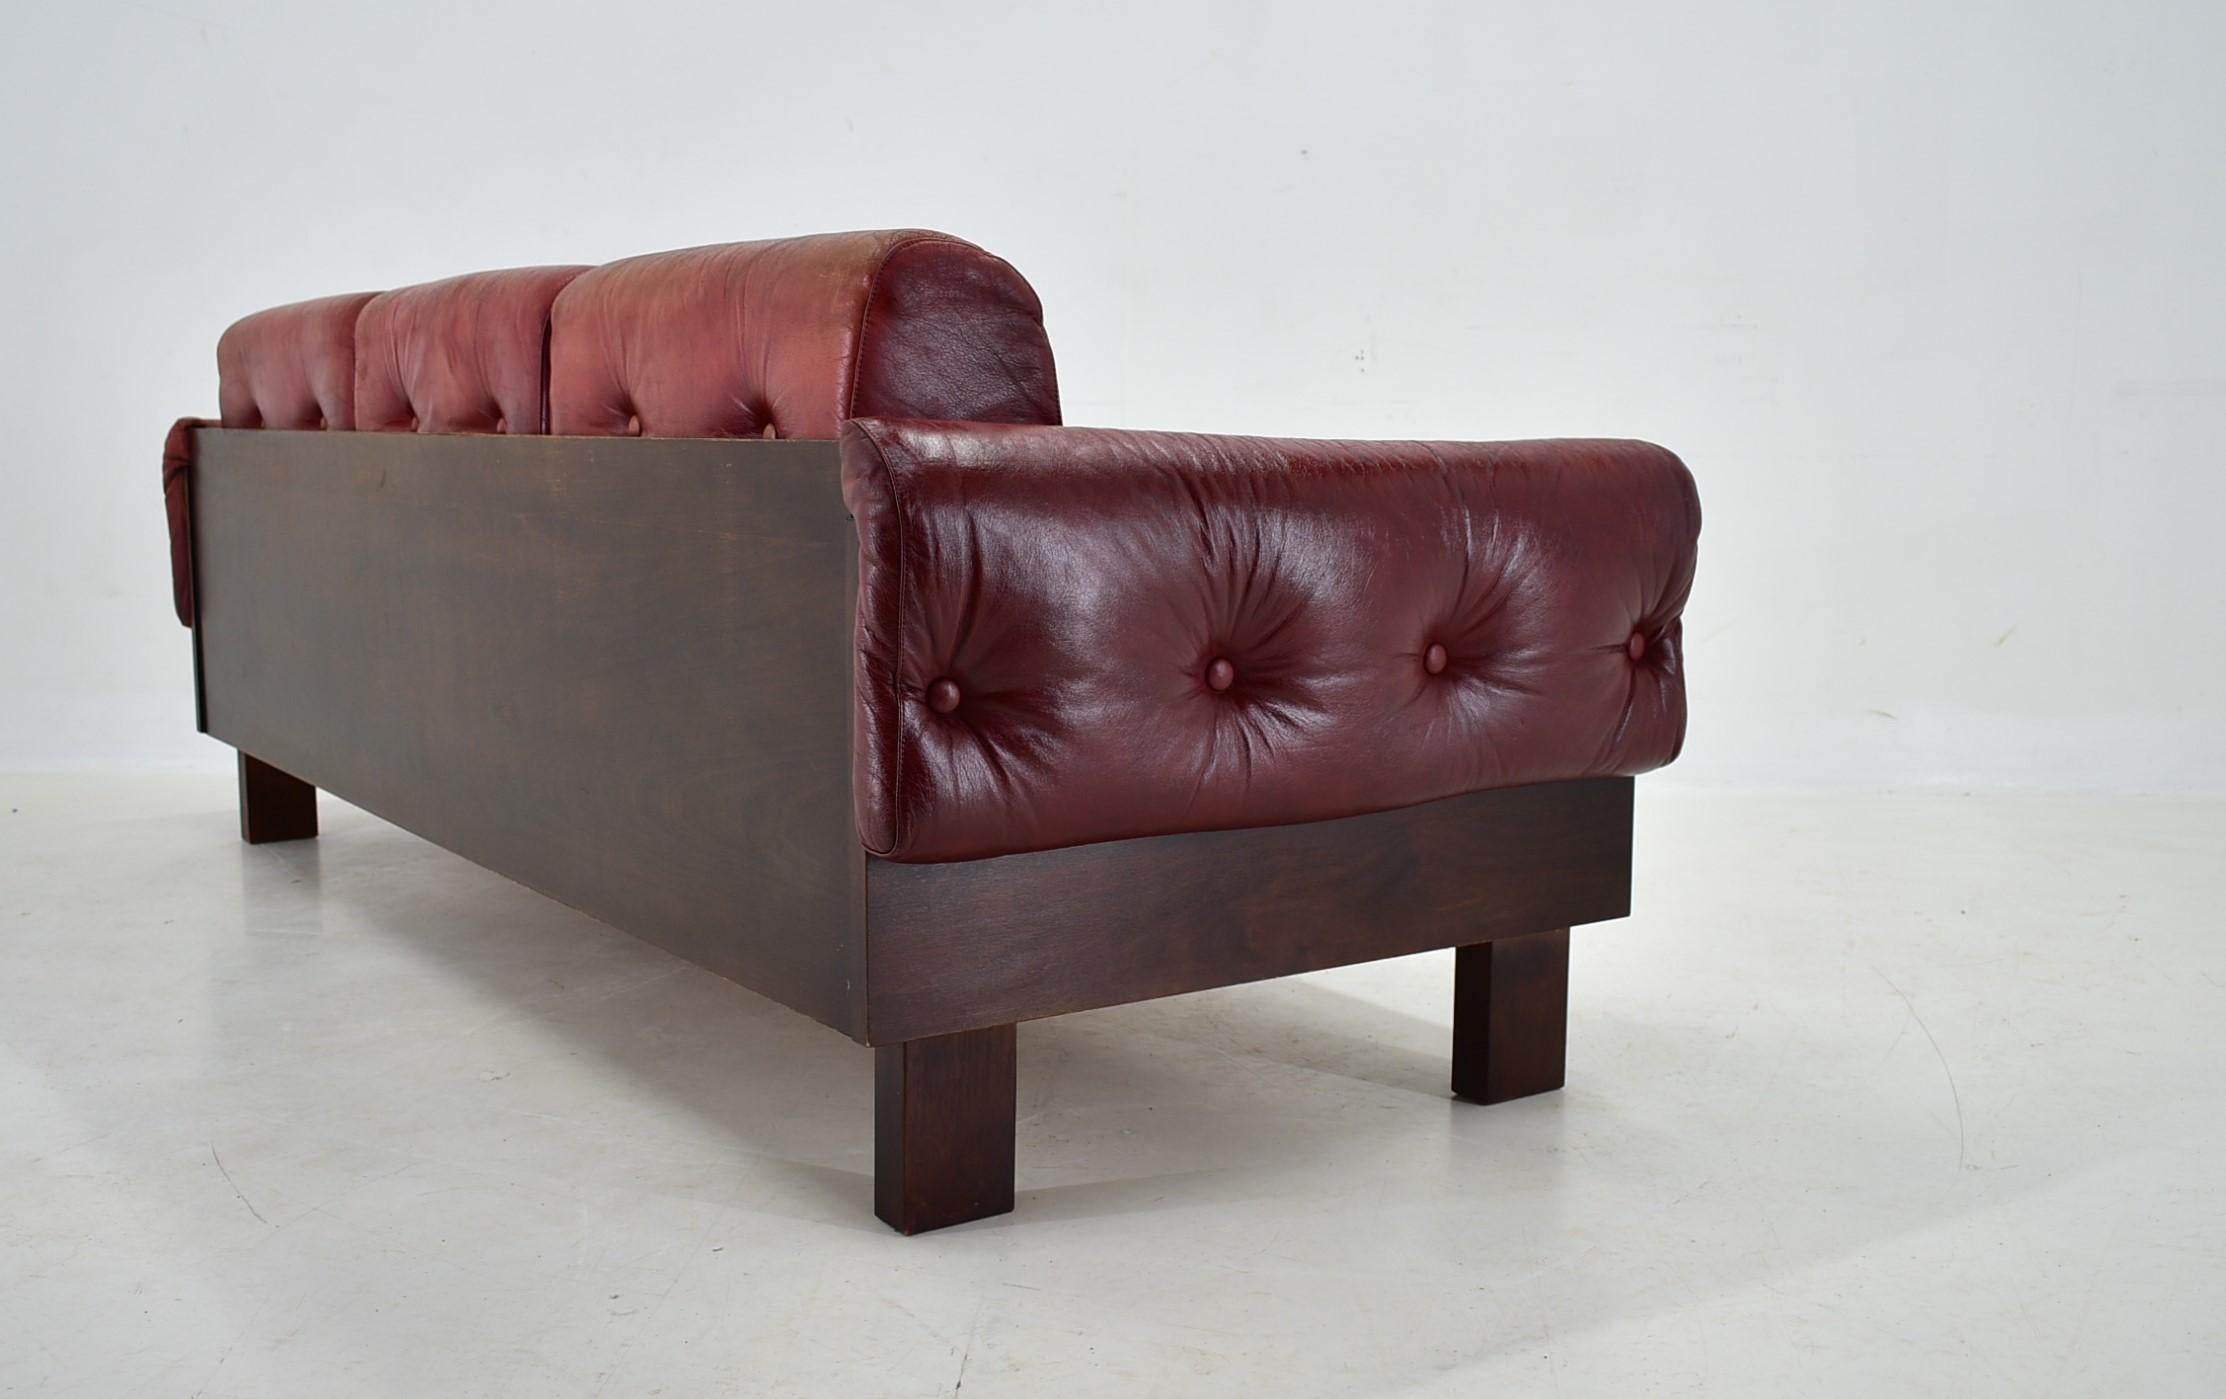 1970s Red Leather 3-Seater Sofa, Finland For Sale 11